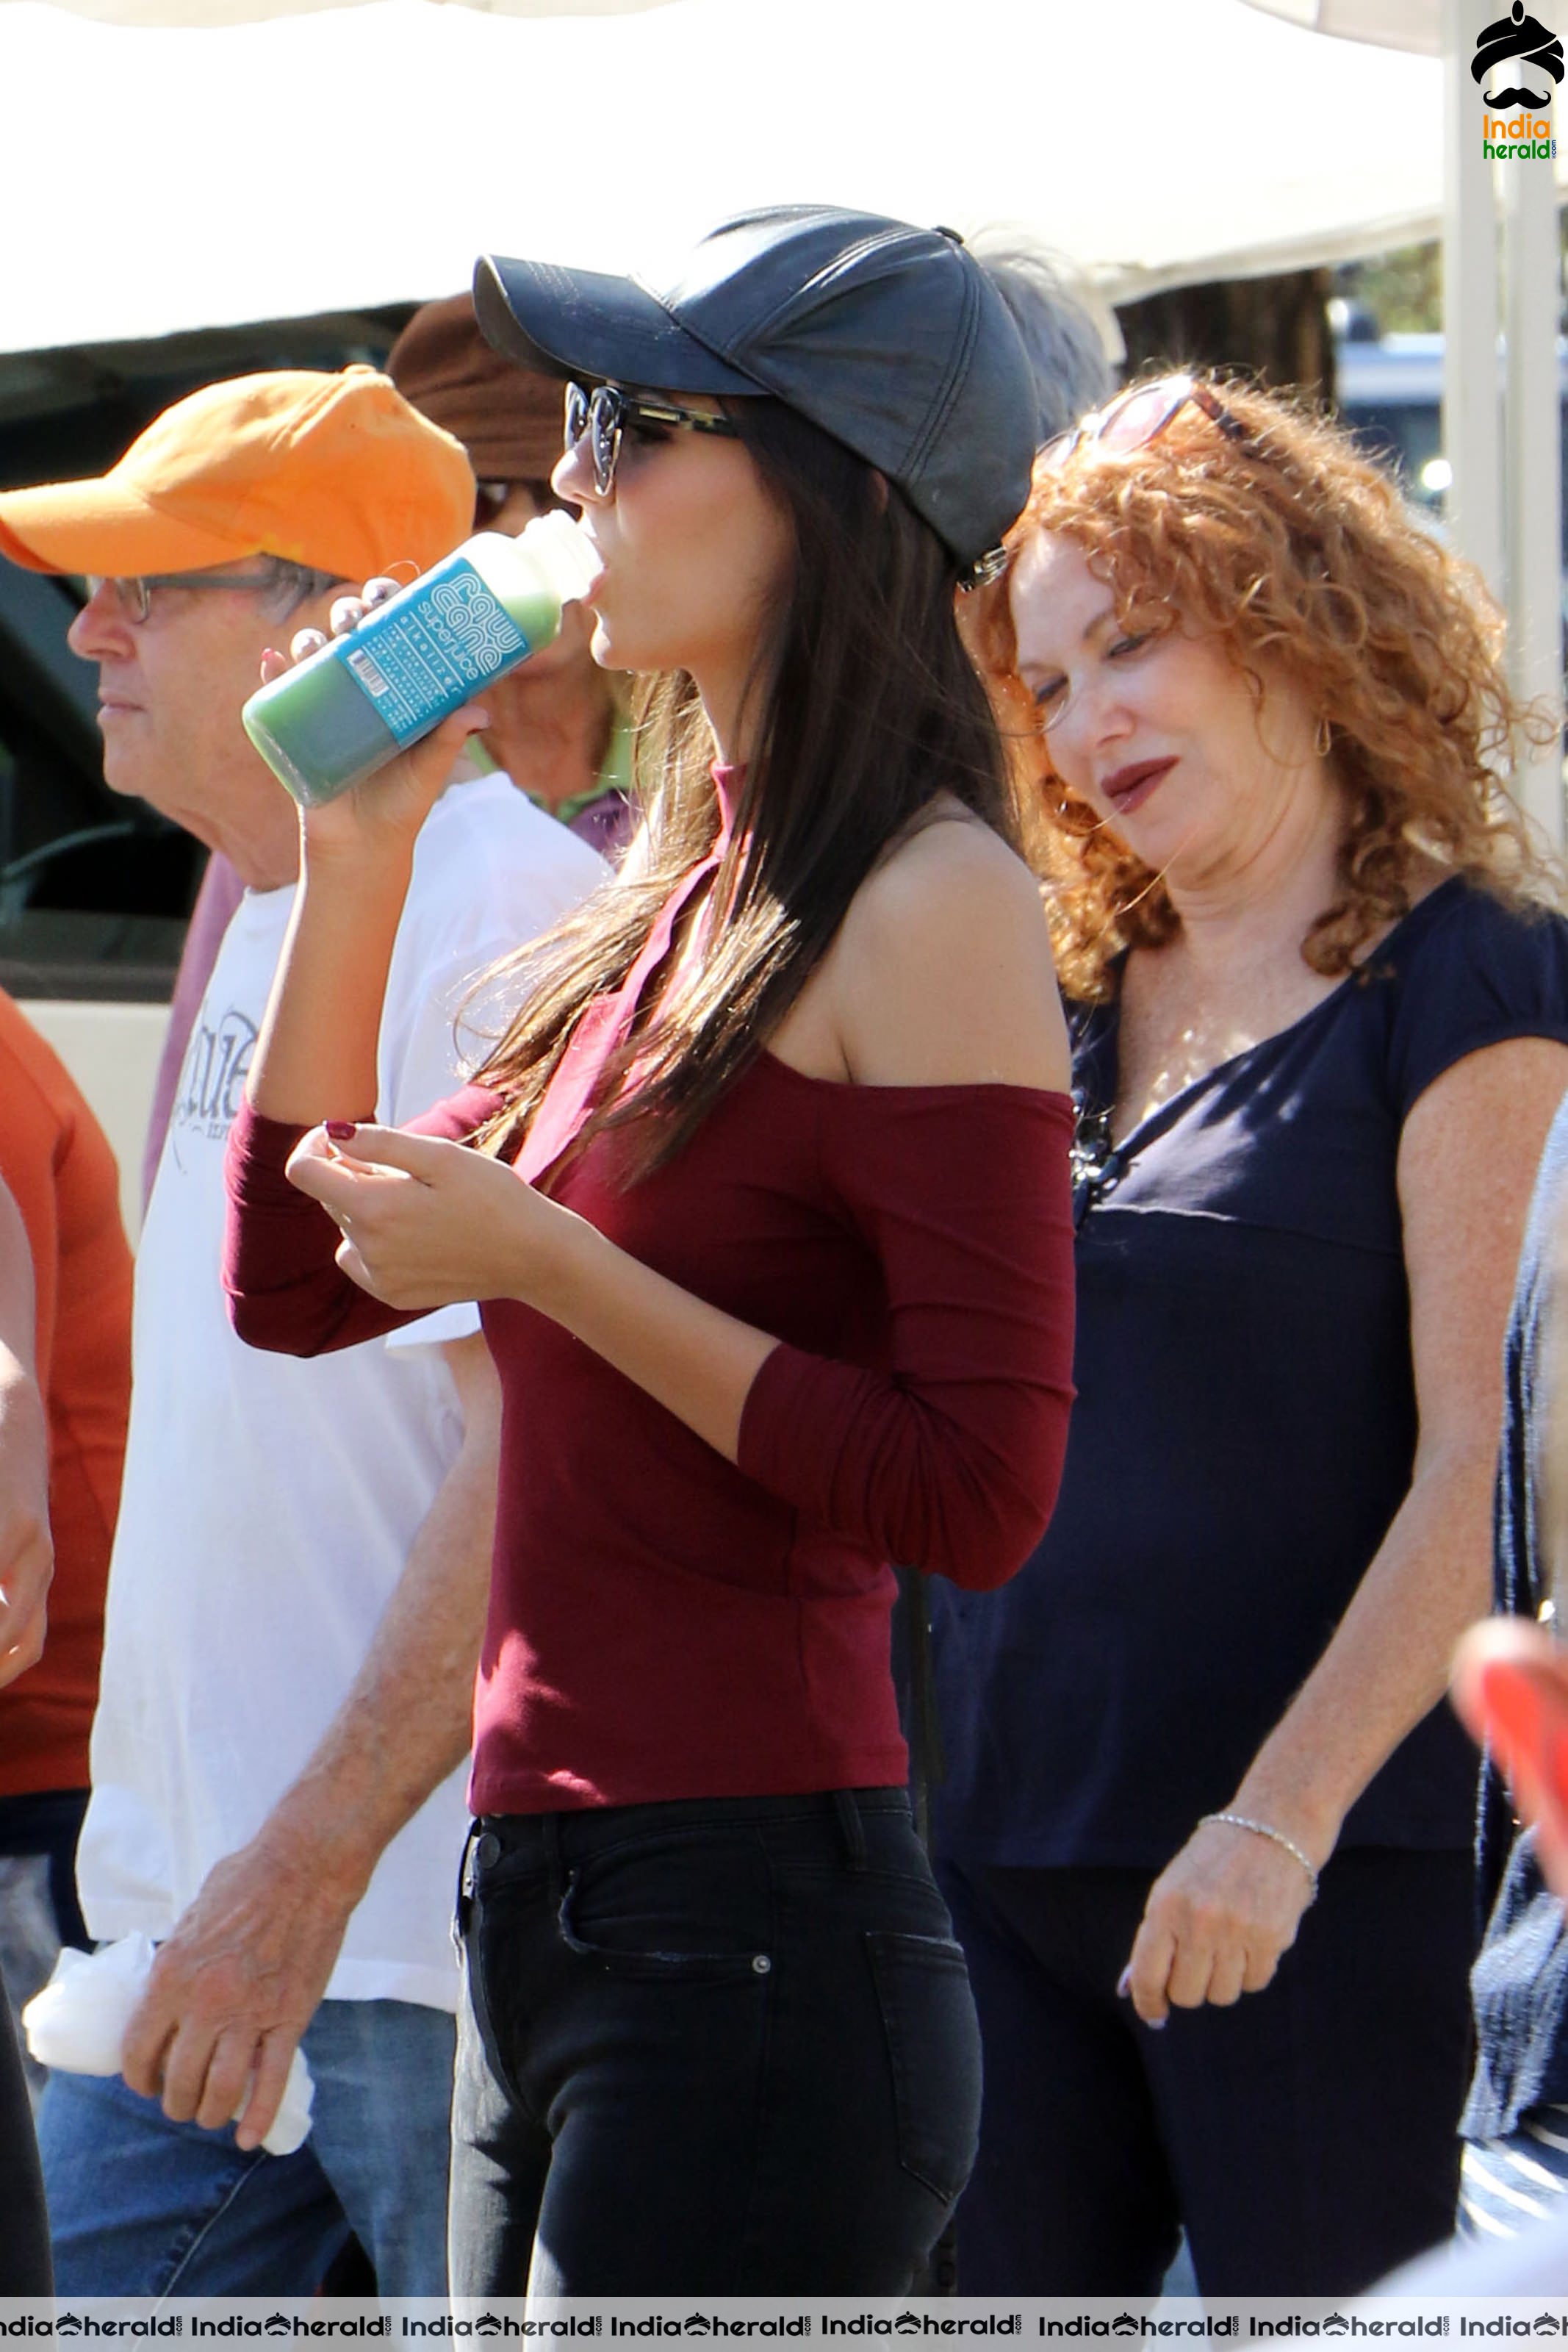 Victoria Justice At a Market with her sister in LA